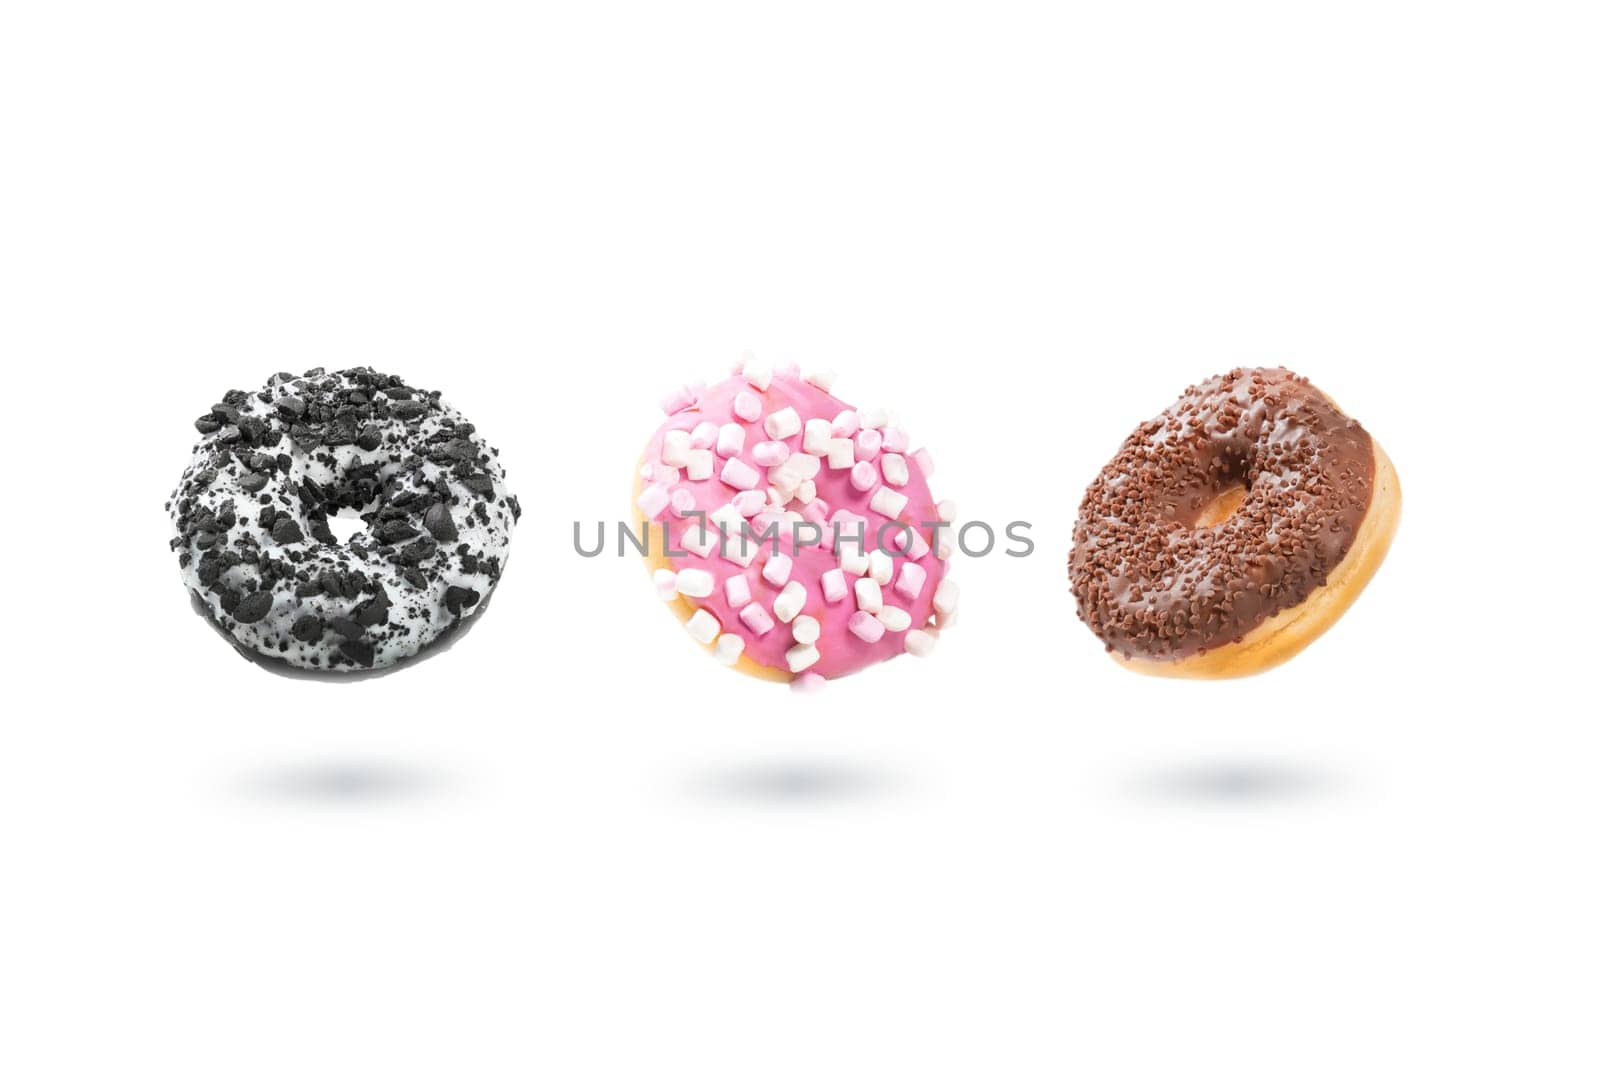 Delicious donut on white background by simpson33